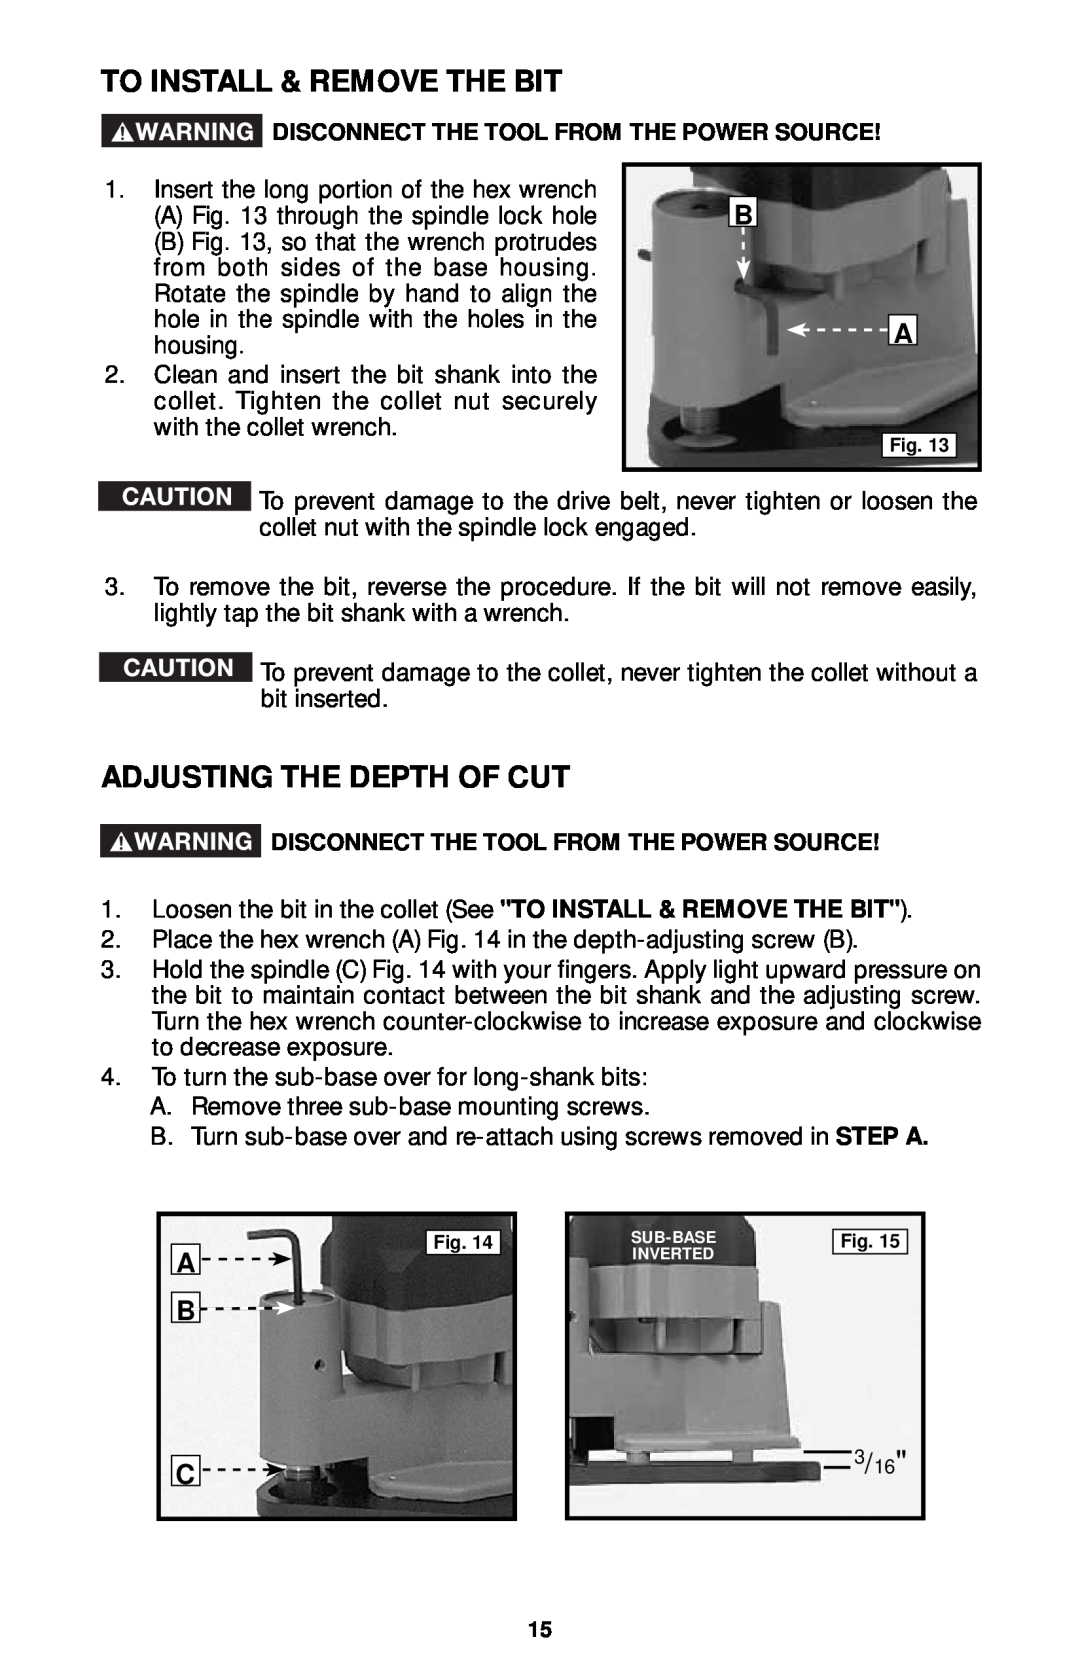 Porter-Cable 7312, 7310, 7320, 7319 instruction manual To Install & Remove The Bit, Adjusting The Depth Of Cut 